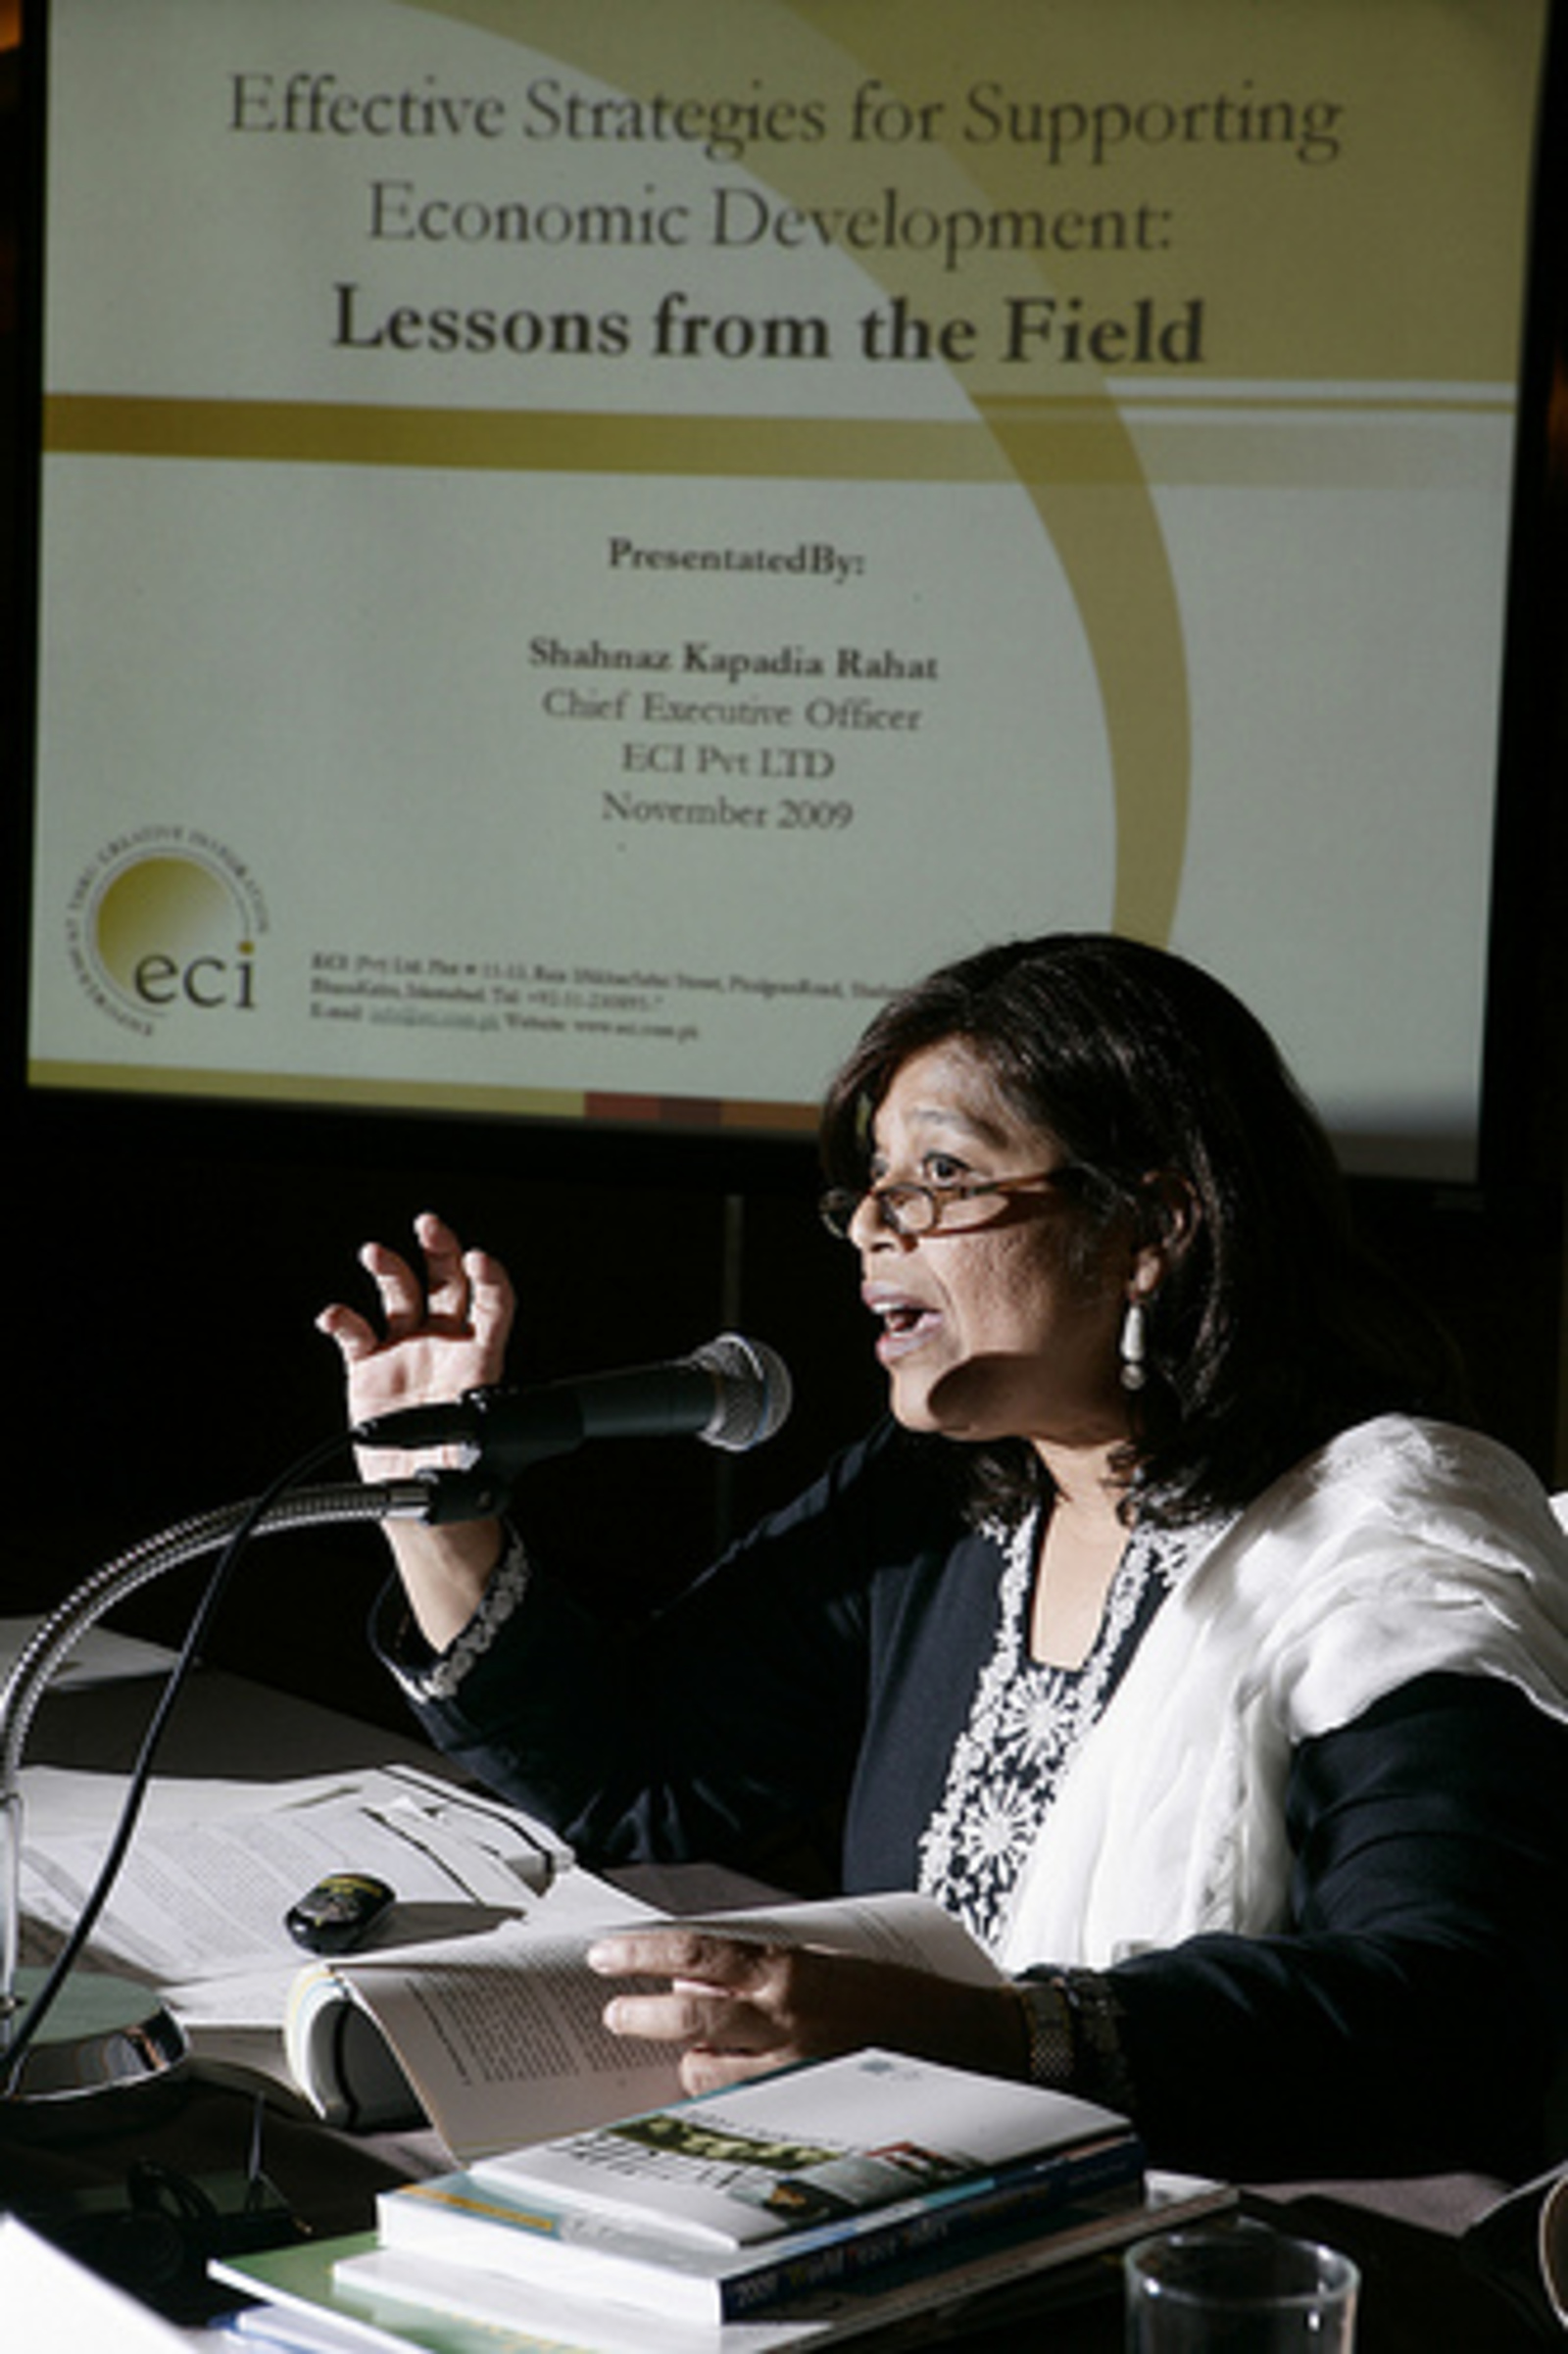 Shahnaz Kapadia Rahat, Chief Executive Officer and Senior Partner-Director of Empowerment Thru Creative Integration from Pakistan, speaks at the conference. 